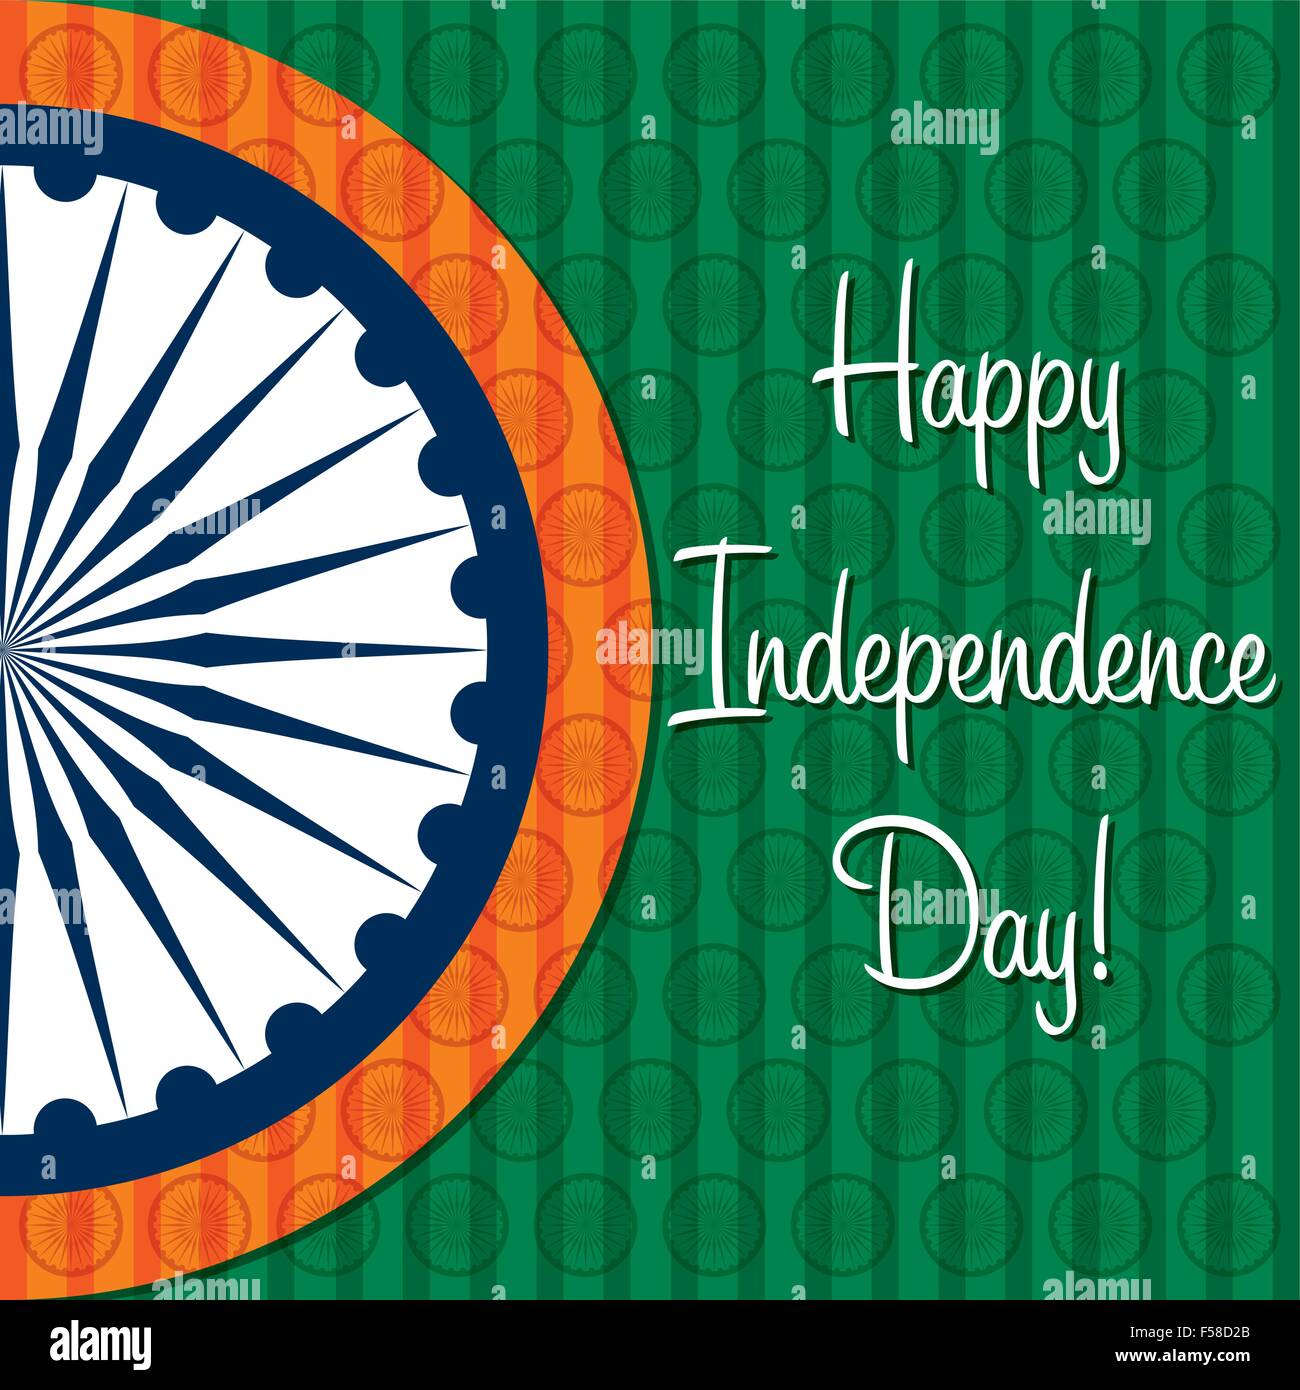 Happy Independence Day India card in vector format Stock Vector ...